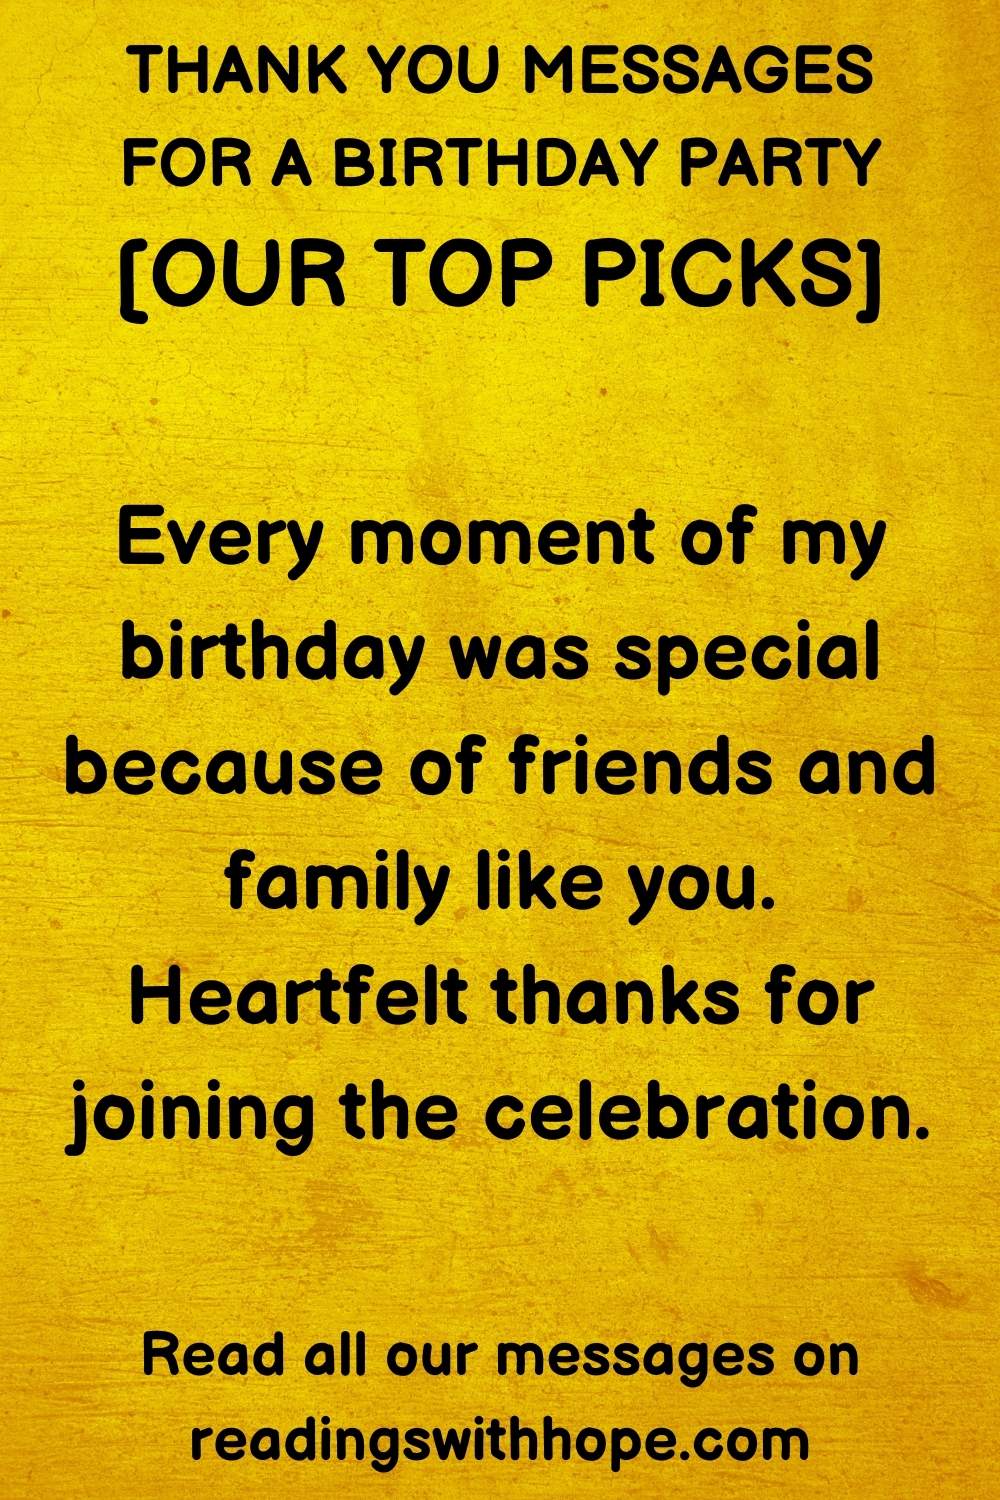 thank you message for a birthday party